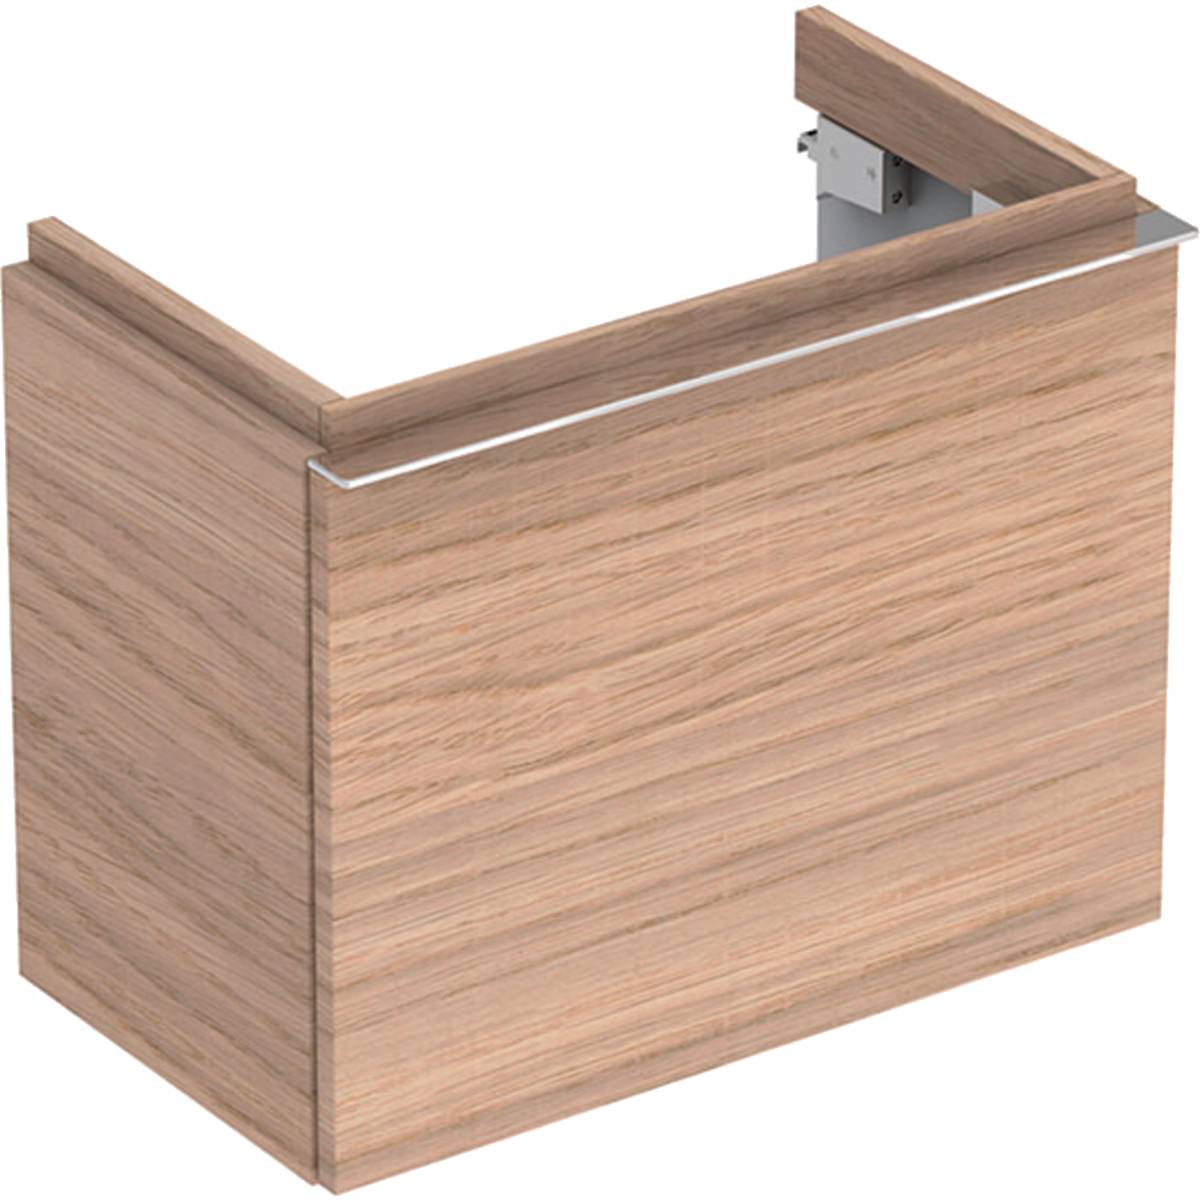 iCon Cabinet for Handrinse Basin, with One Drawer